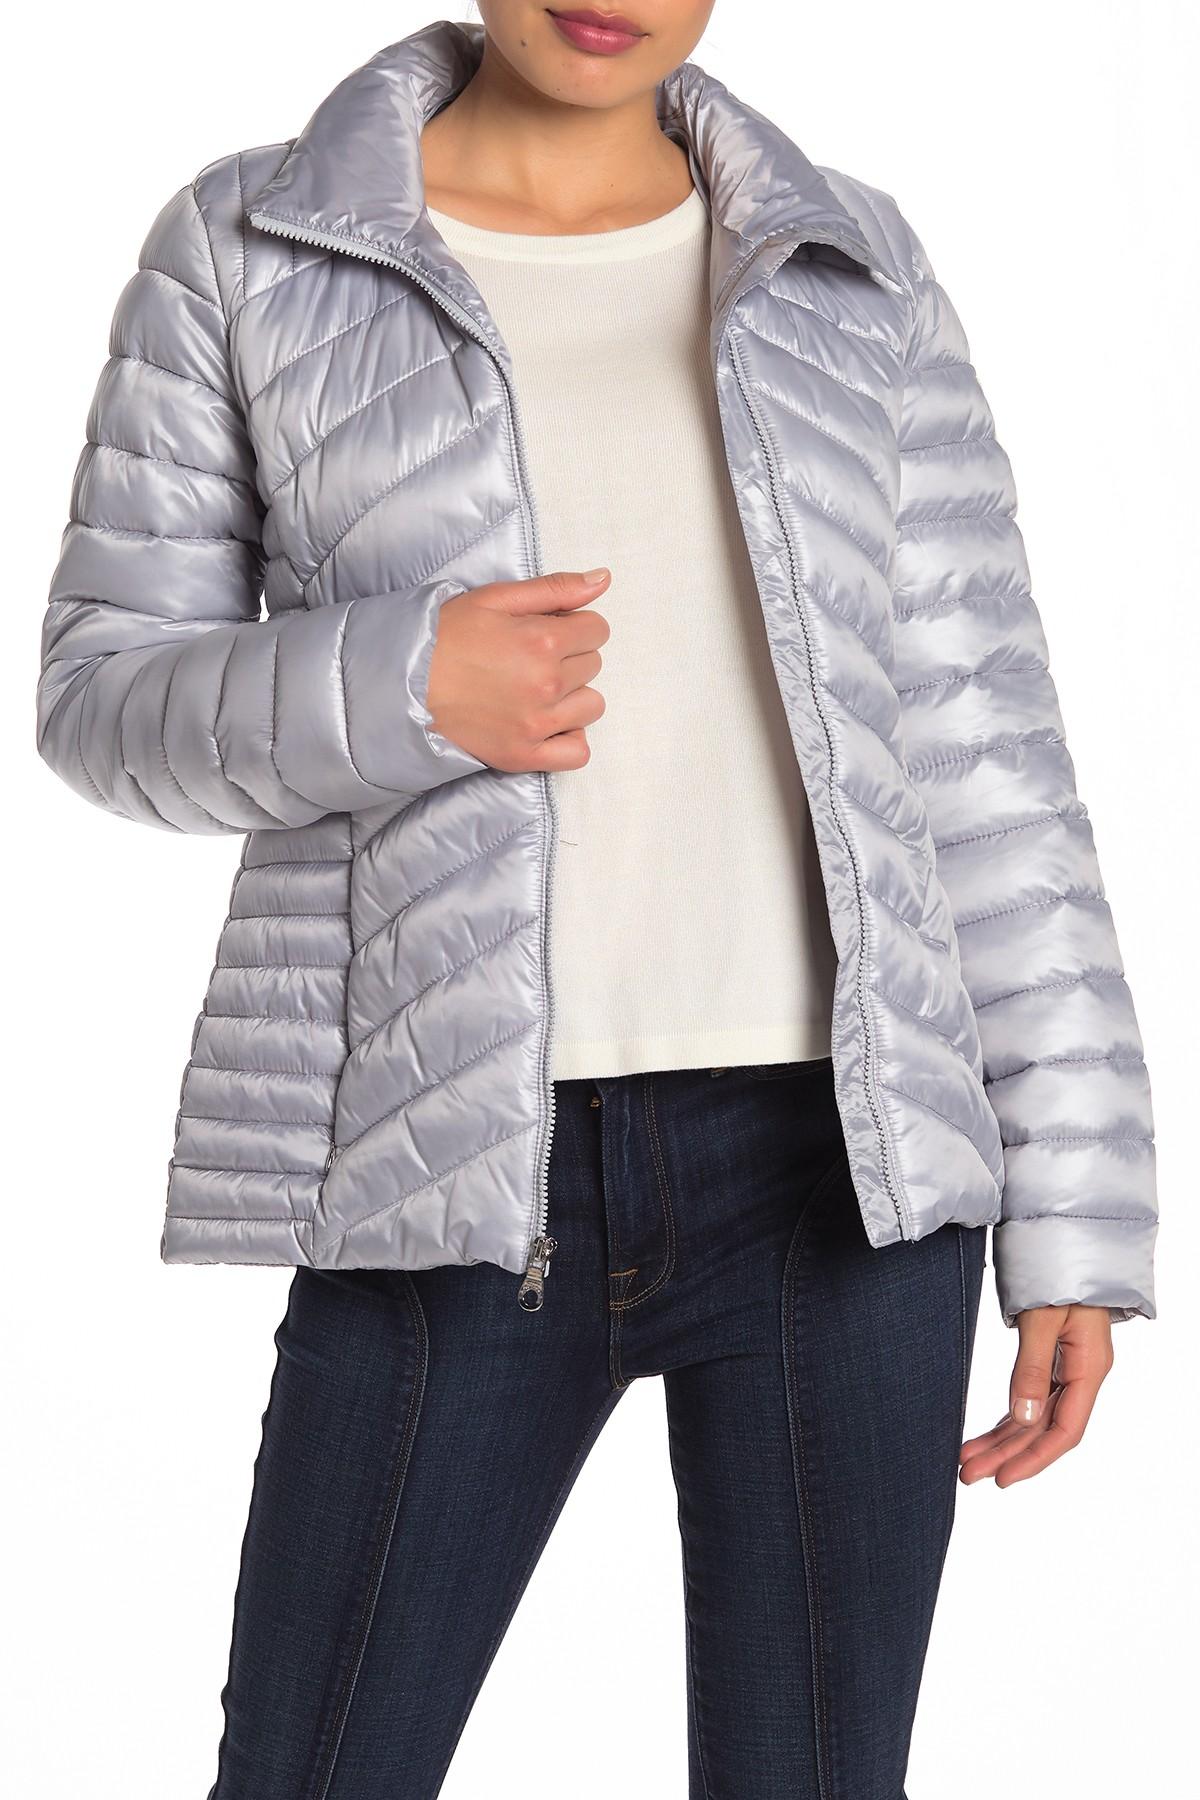 Guess Synthetic Packable Hooded Dickey Puffer Jacket in Gray - Lyst